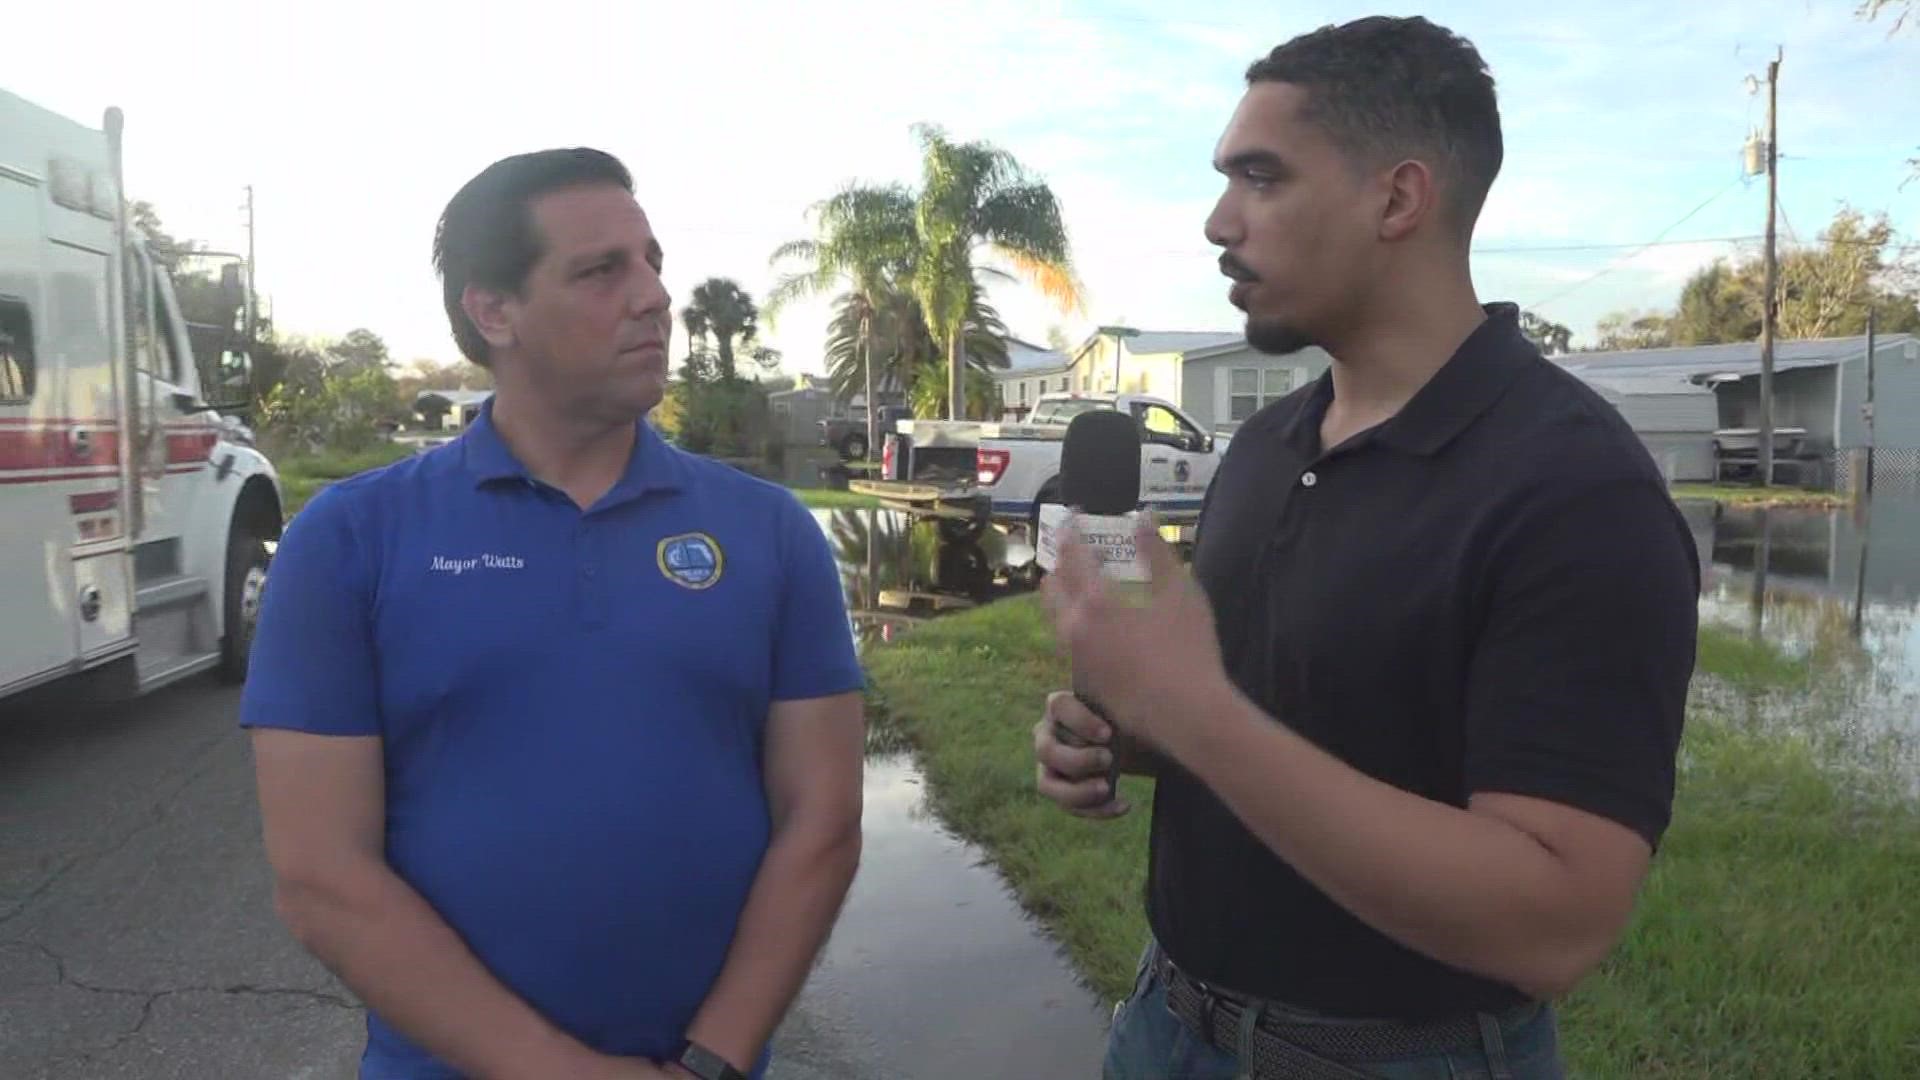 The Florida Division of Emergency Management arrived Friday in Welaka with shower and bathroom units for the residents in Sportsmans Harbor.